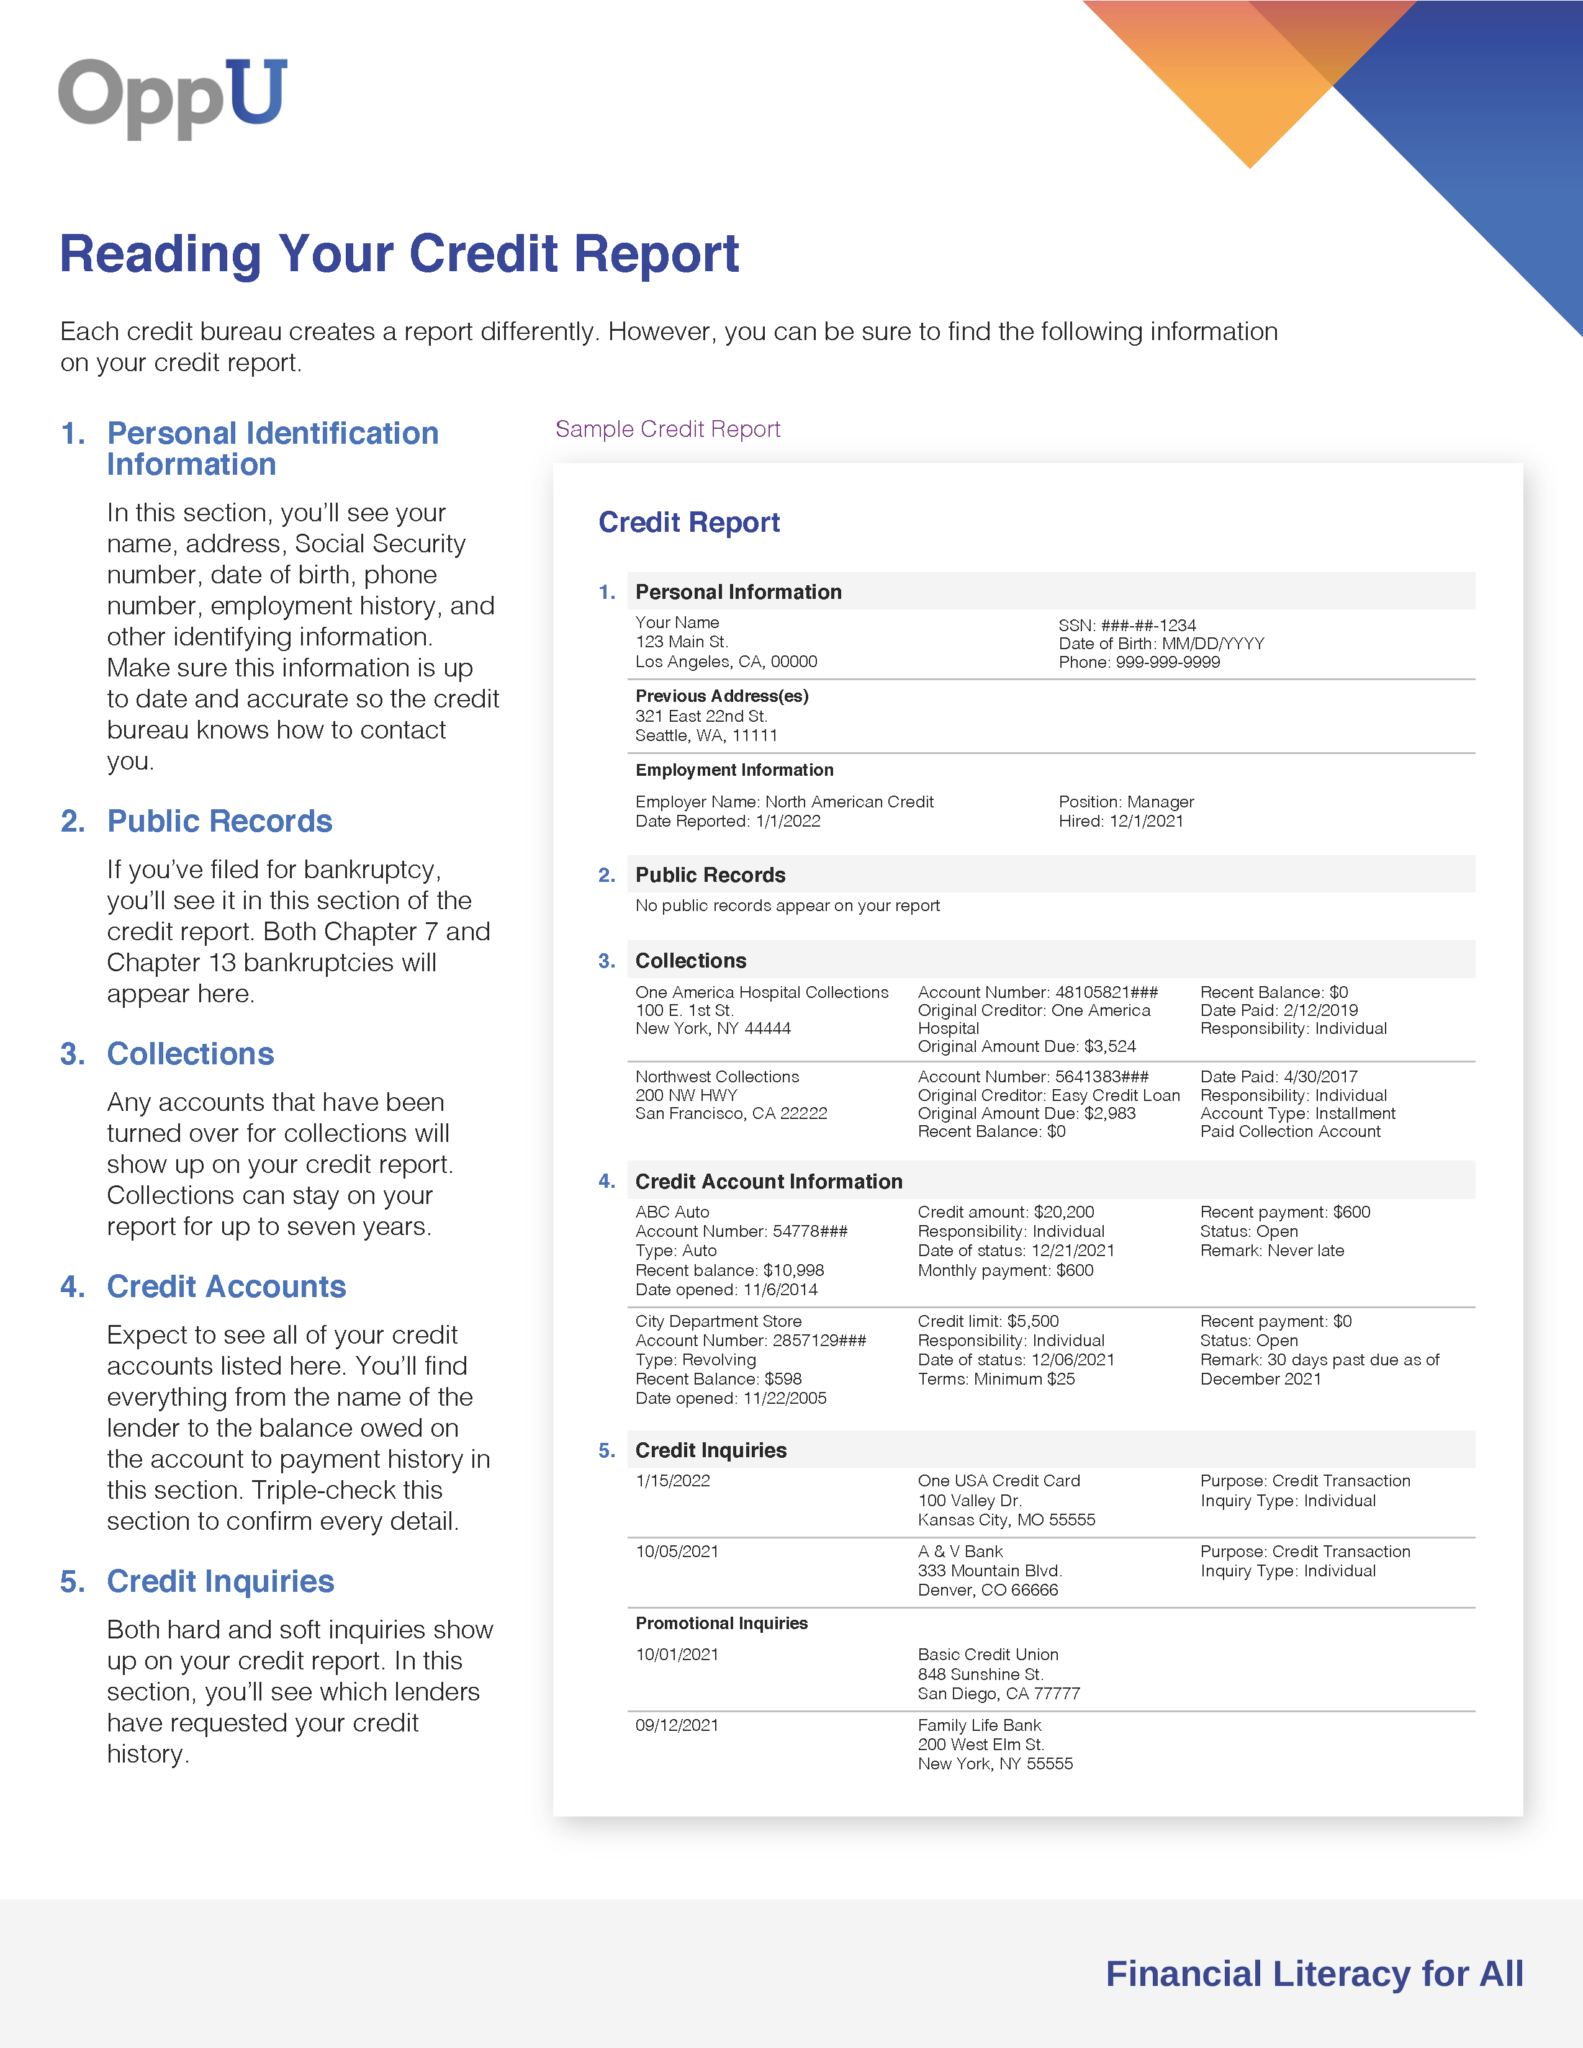 how to read informative research credit report